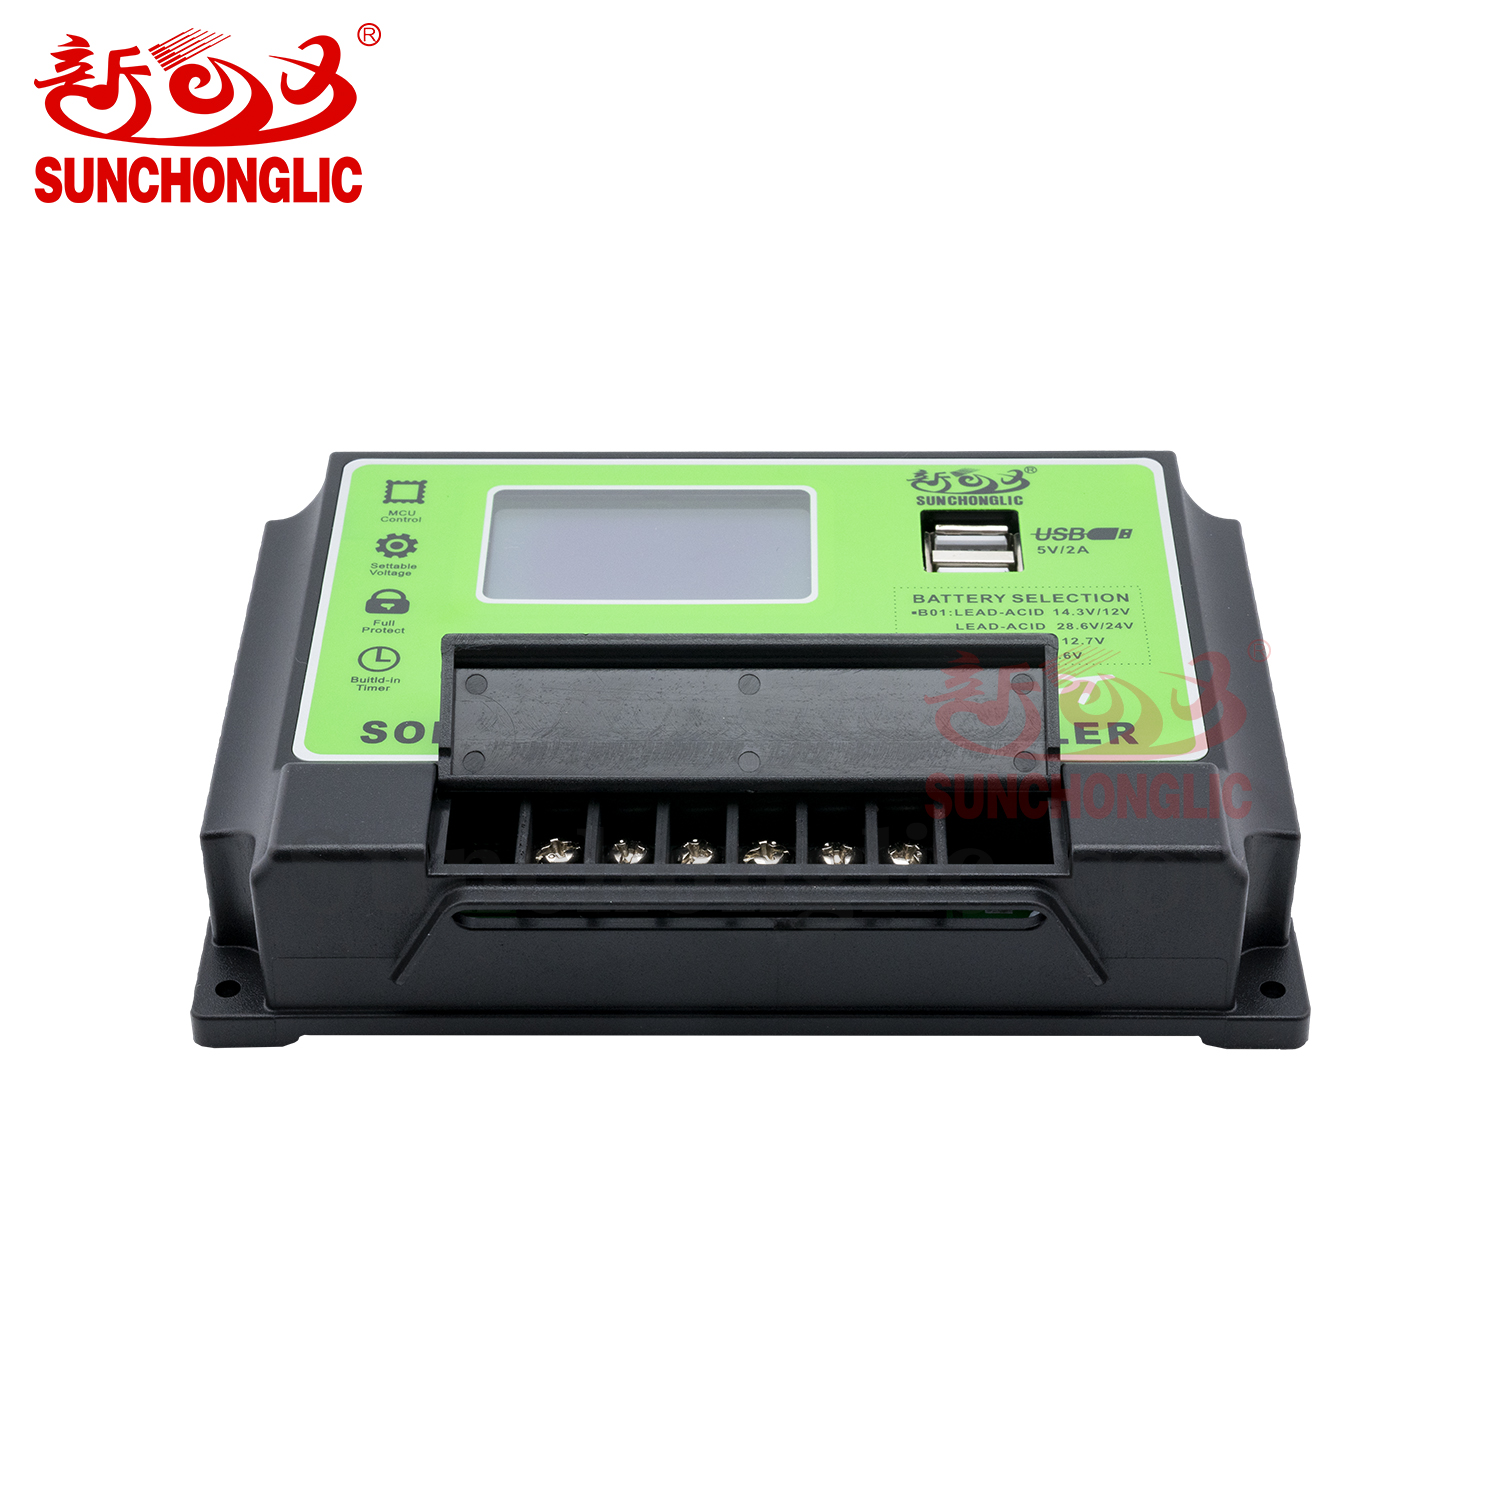 MPPT Solar Charge Controller - FT-M1250